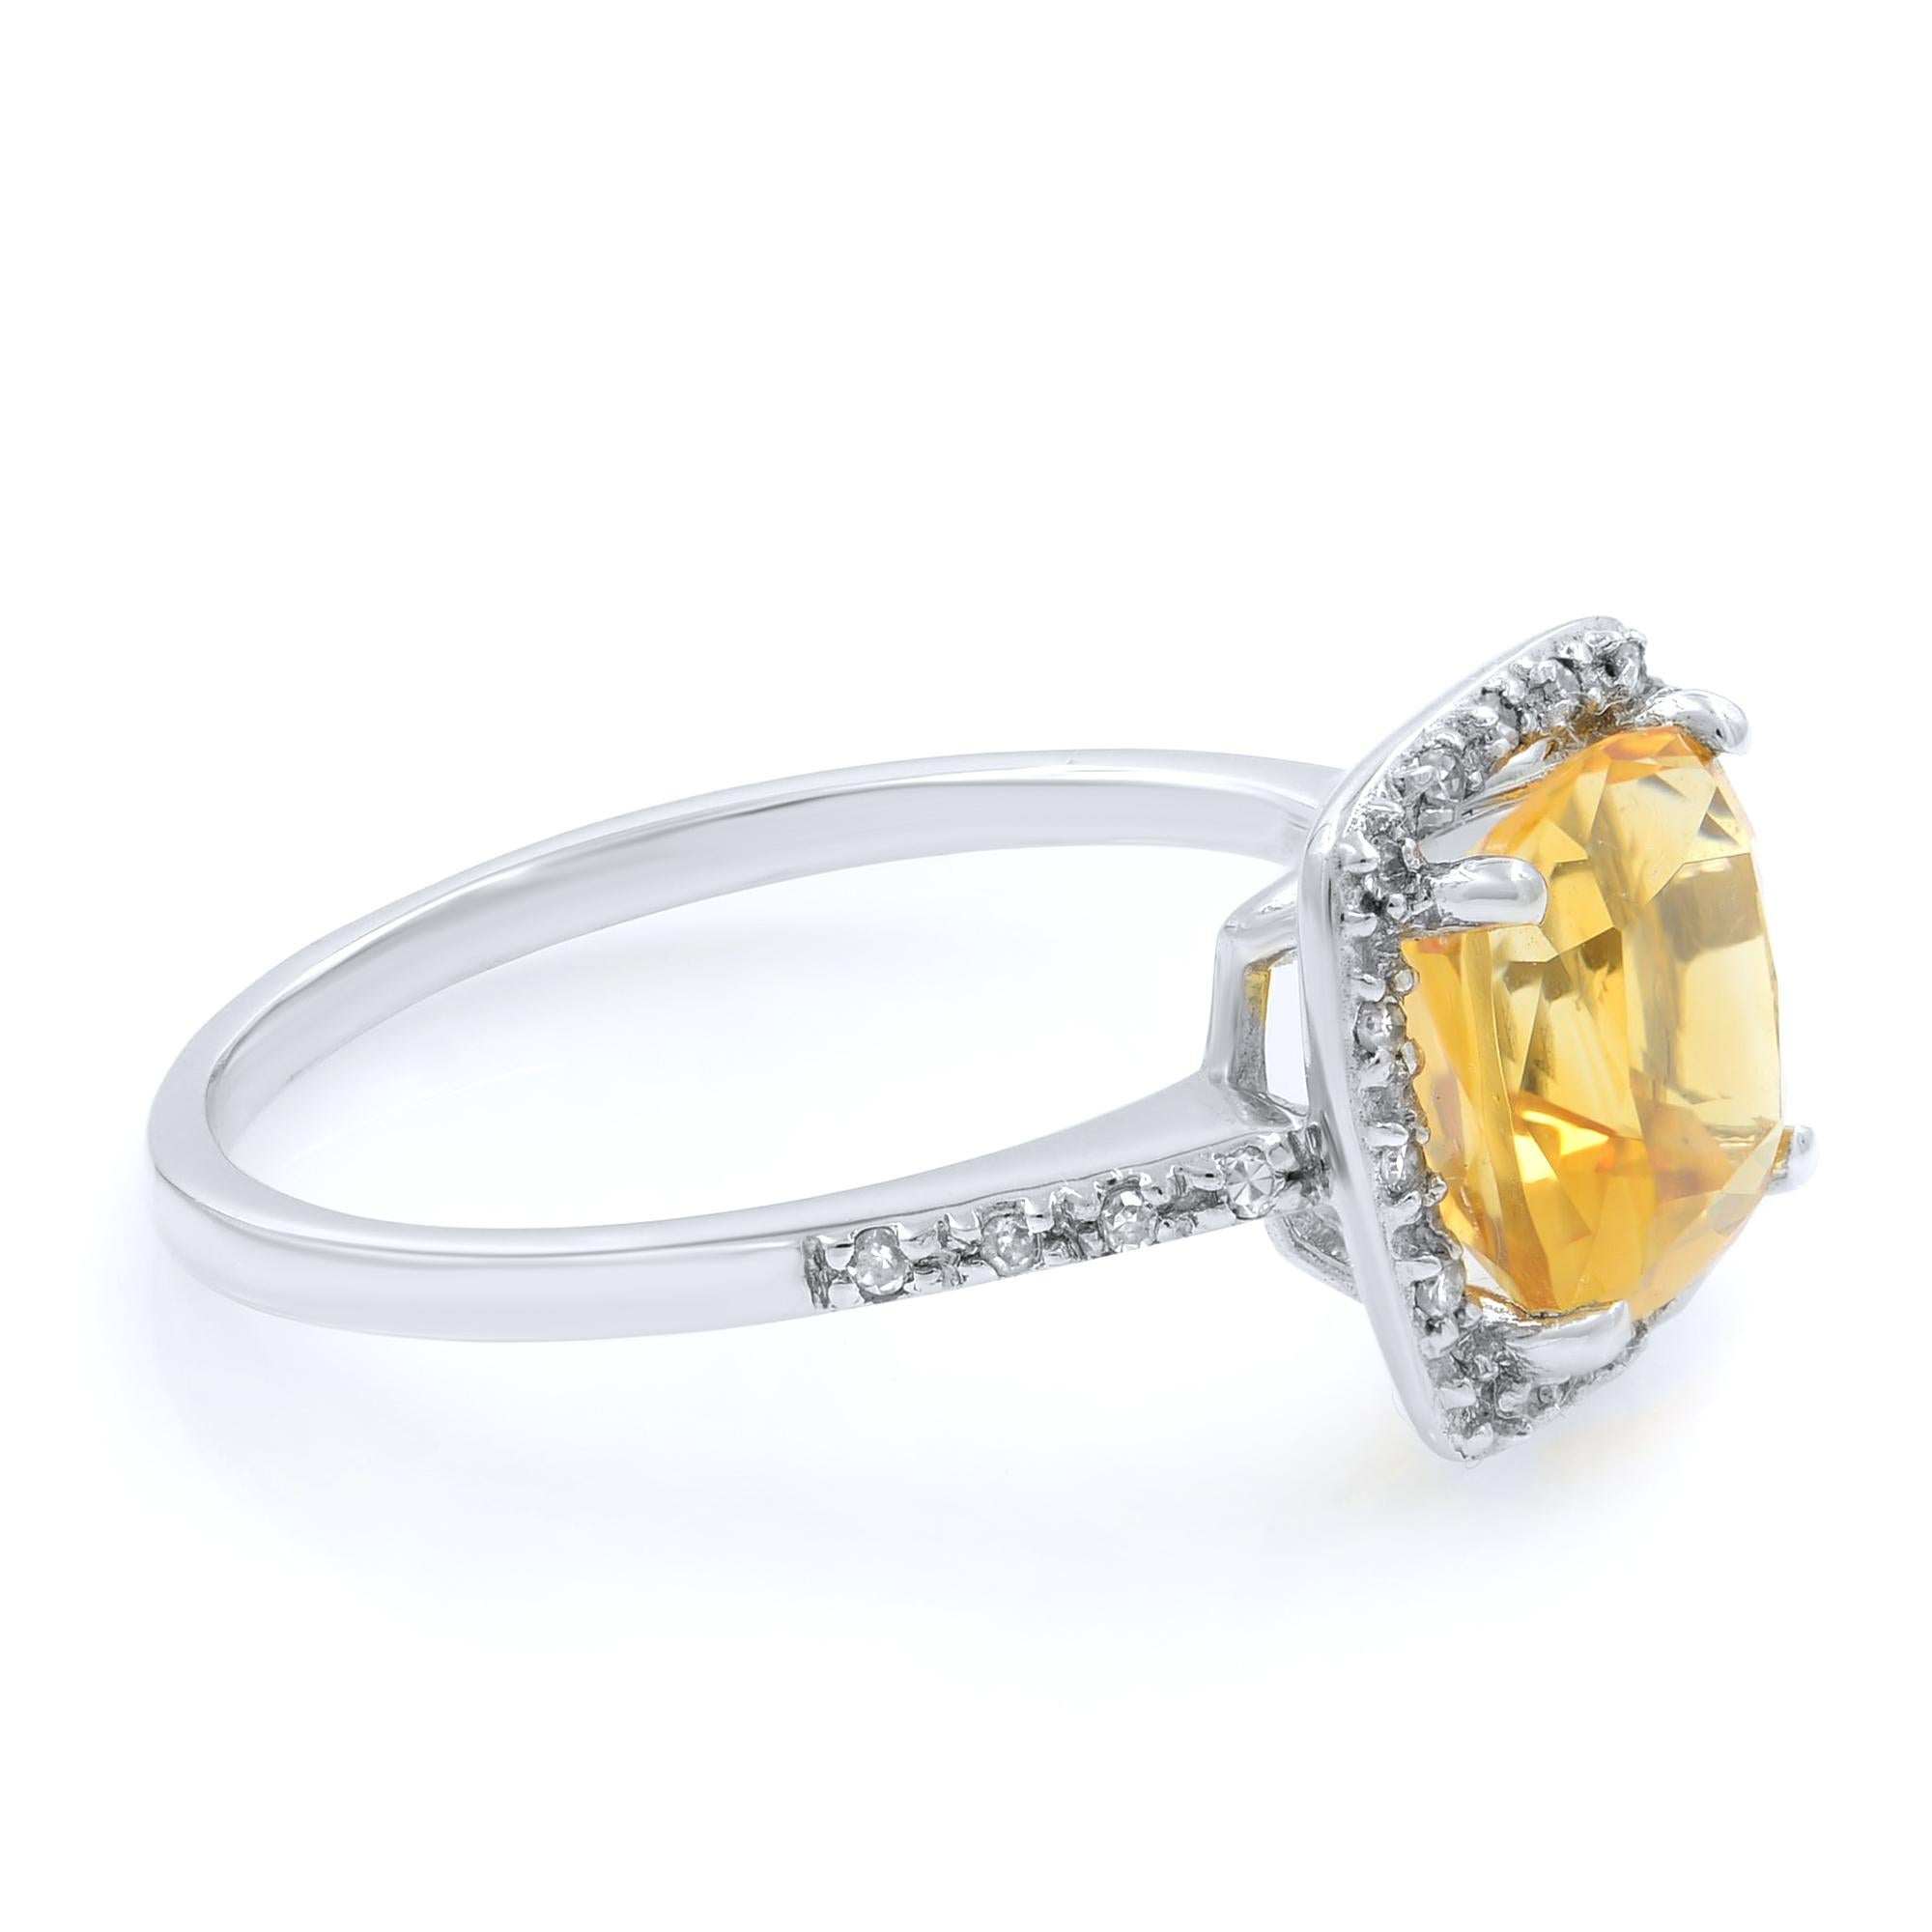 This gorgeous engagement ring is crafted in 14k white gold. The cushion cut citrine weighing 2.7cttw is illuminated by a sparkling halo of diamonds. To complete the brilliant allure, there are additional diamond accents on the shoulders of this